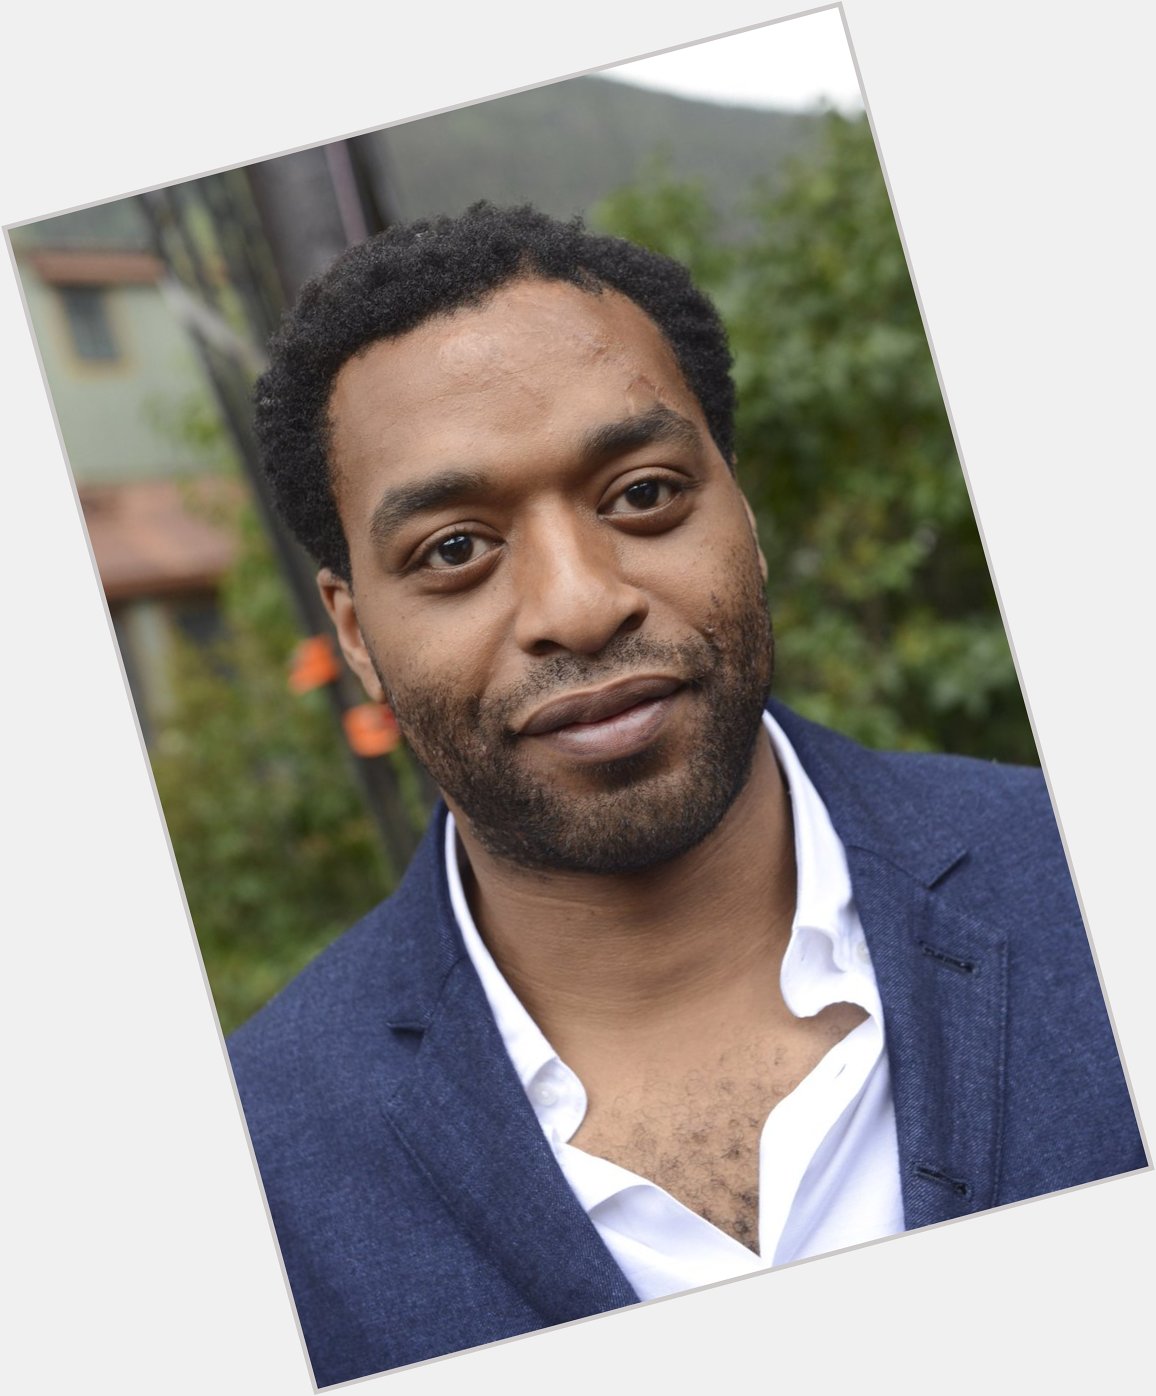 Happy Birthday to Chiwetel Ejiofor! 

Do you recognize him from anything you ve watched? 